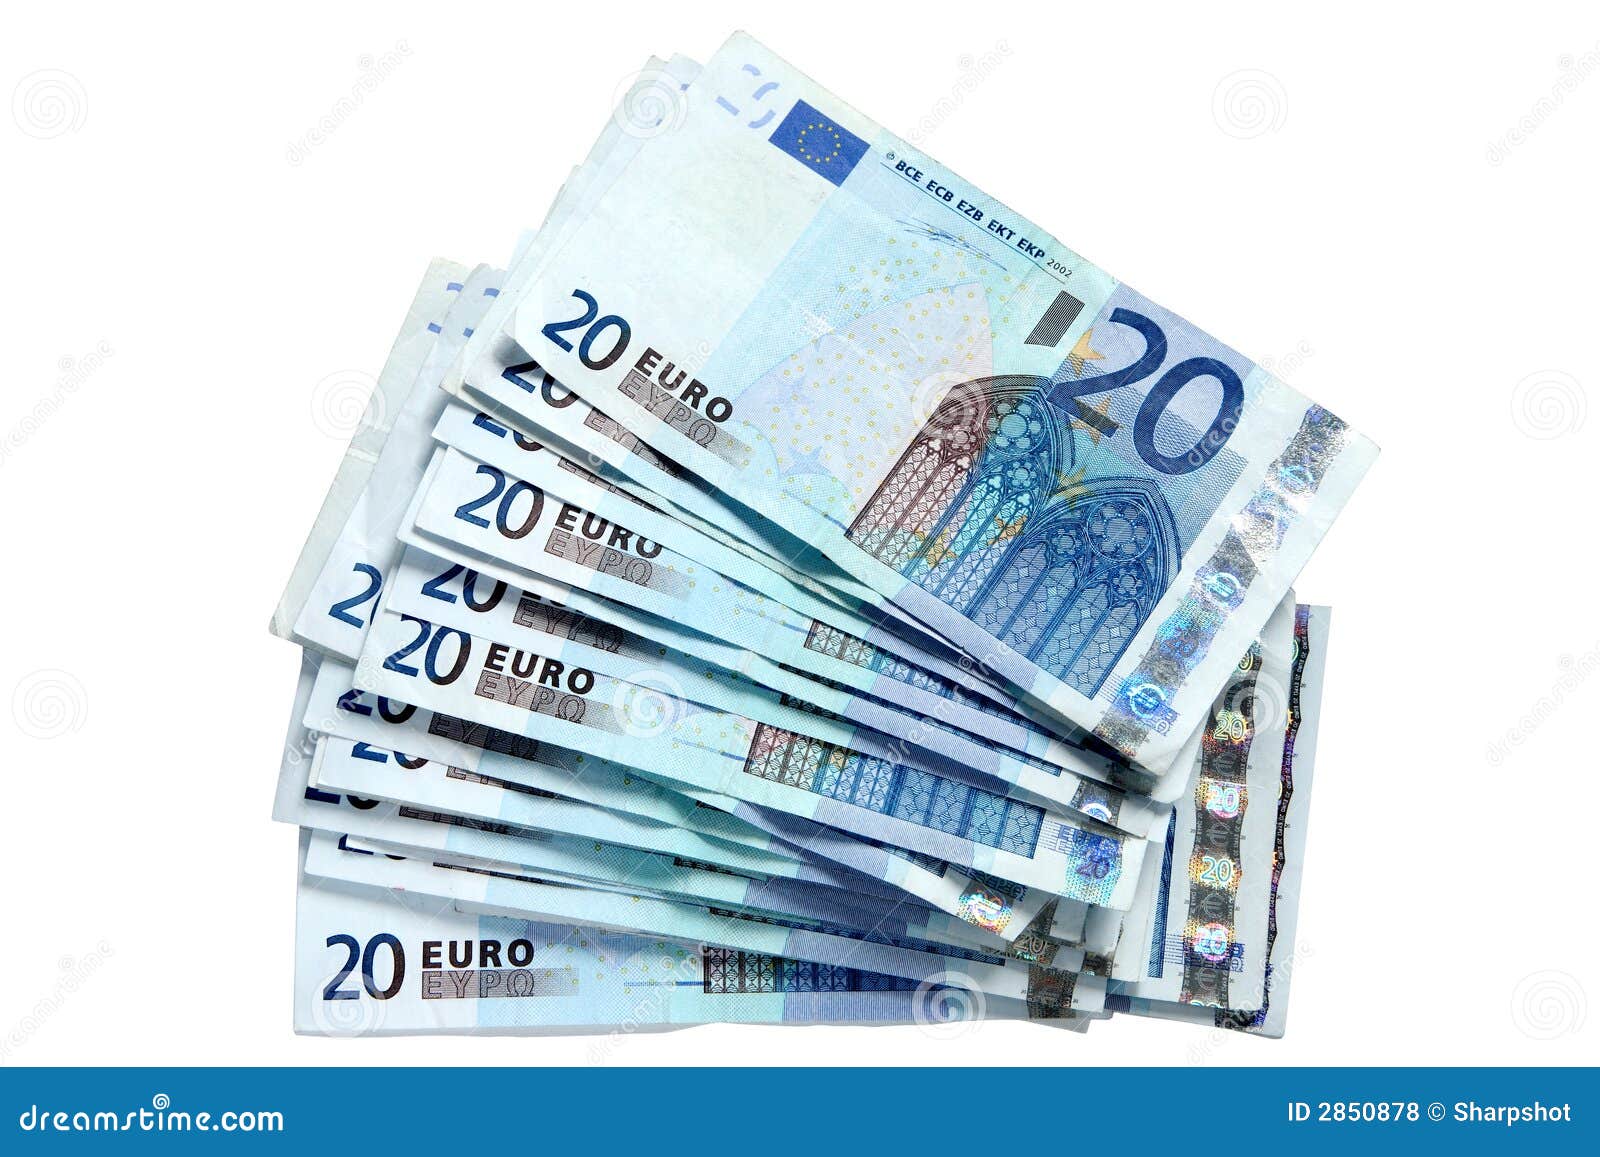 4 075 Euro Photos Free Royalty Free Stock Photos From Dreamstime